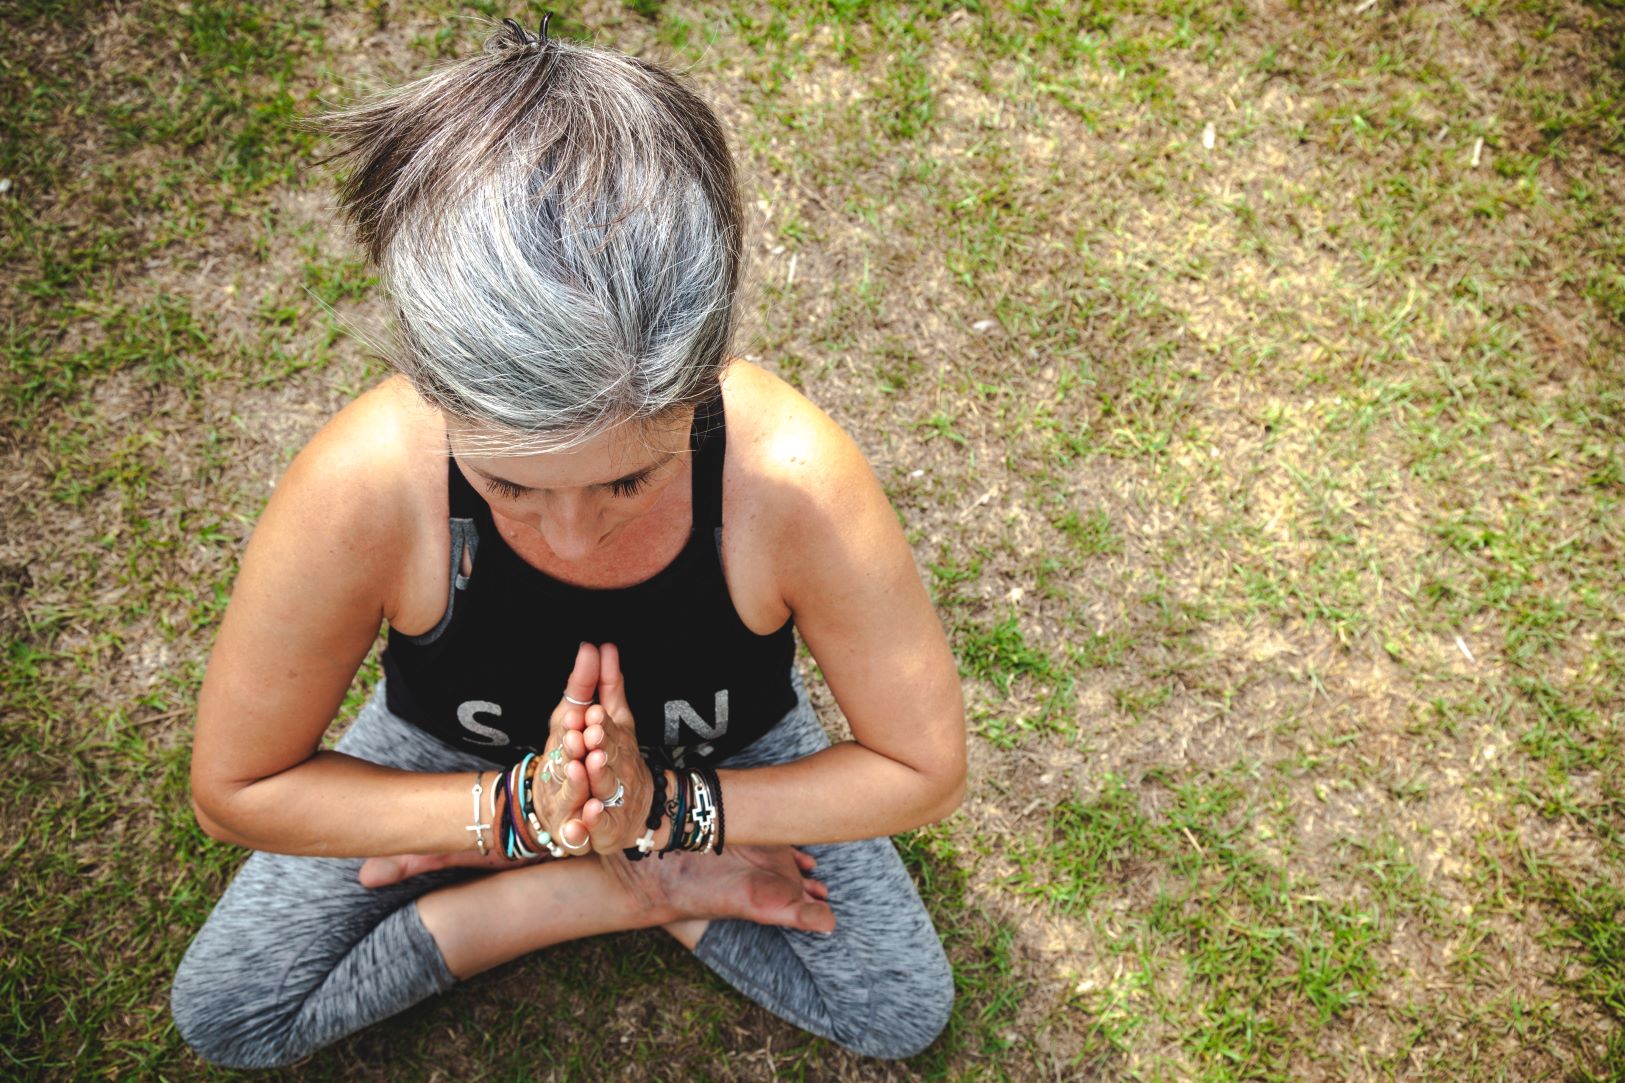 An image of a woman with gray hair in a yoga pose.